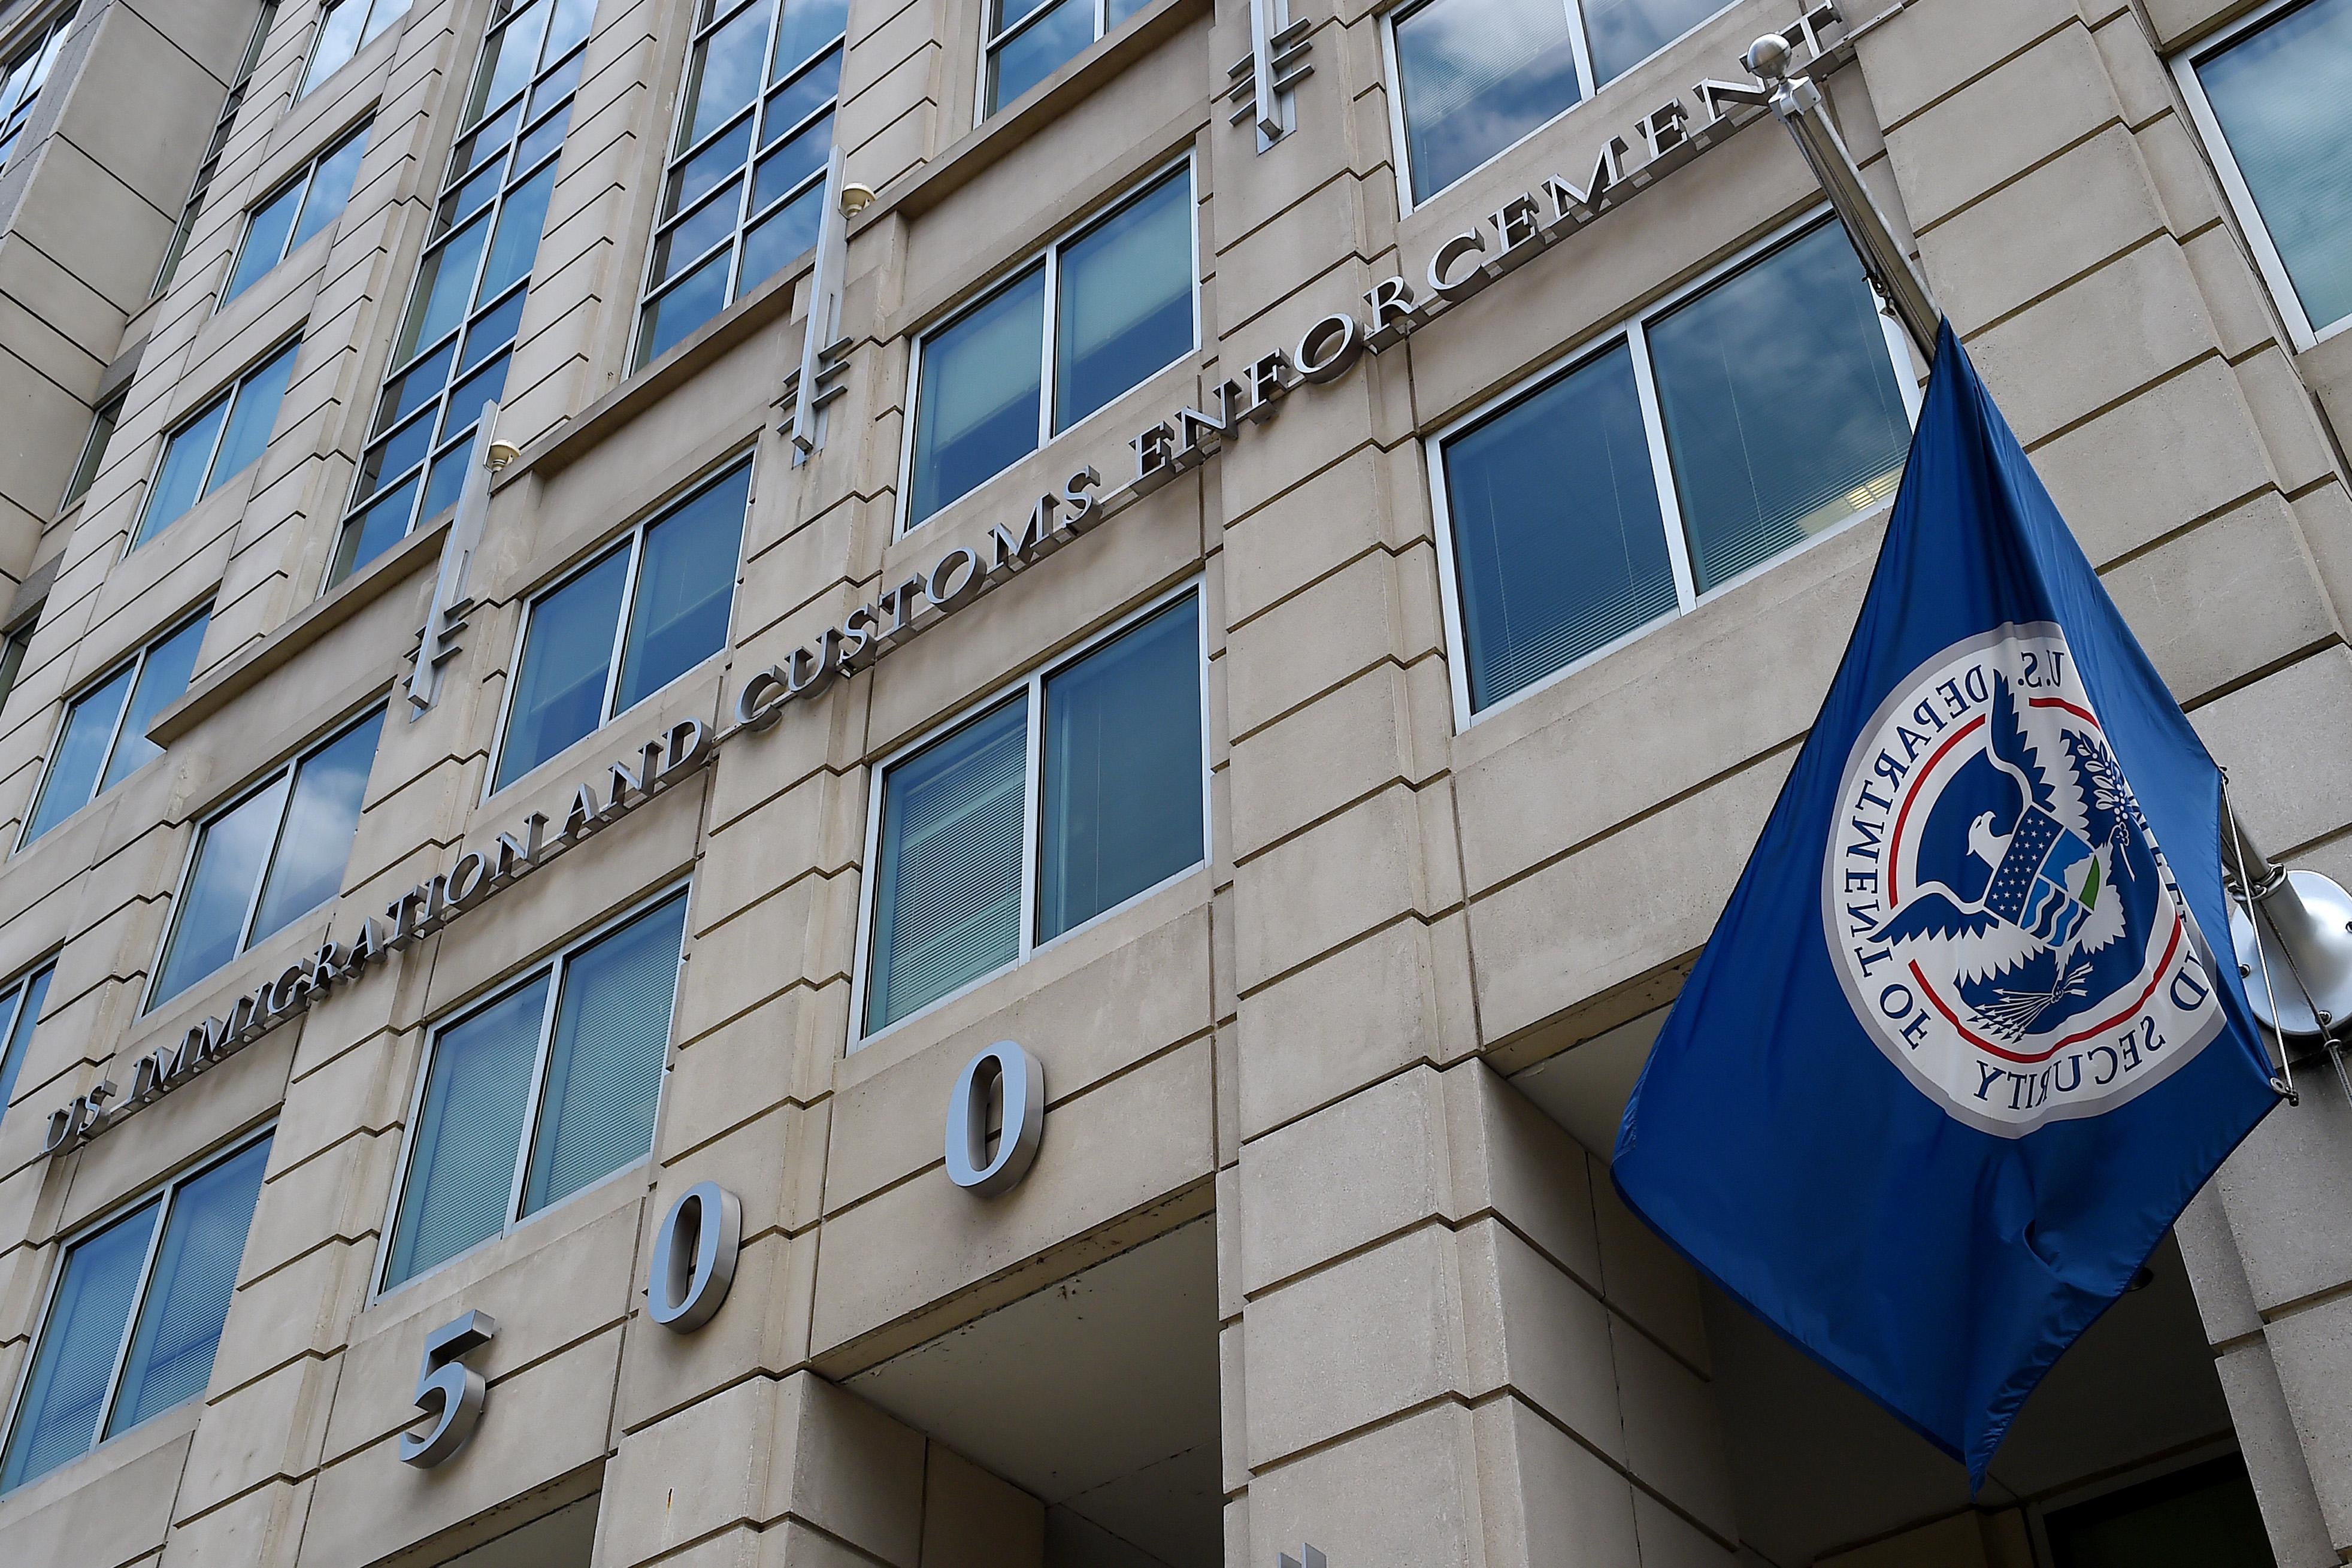 The Department of Homeland Security flag flies on the exterior of the Immigration and Customs Enforcement building